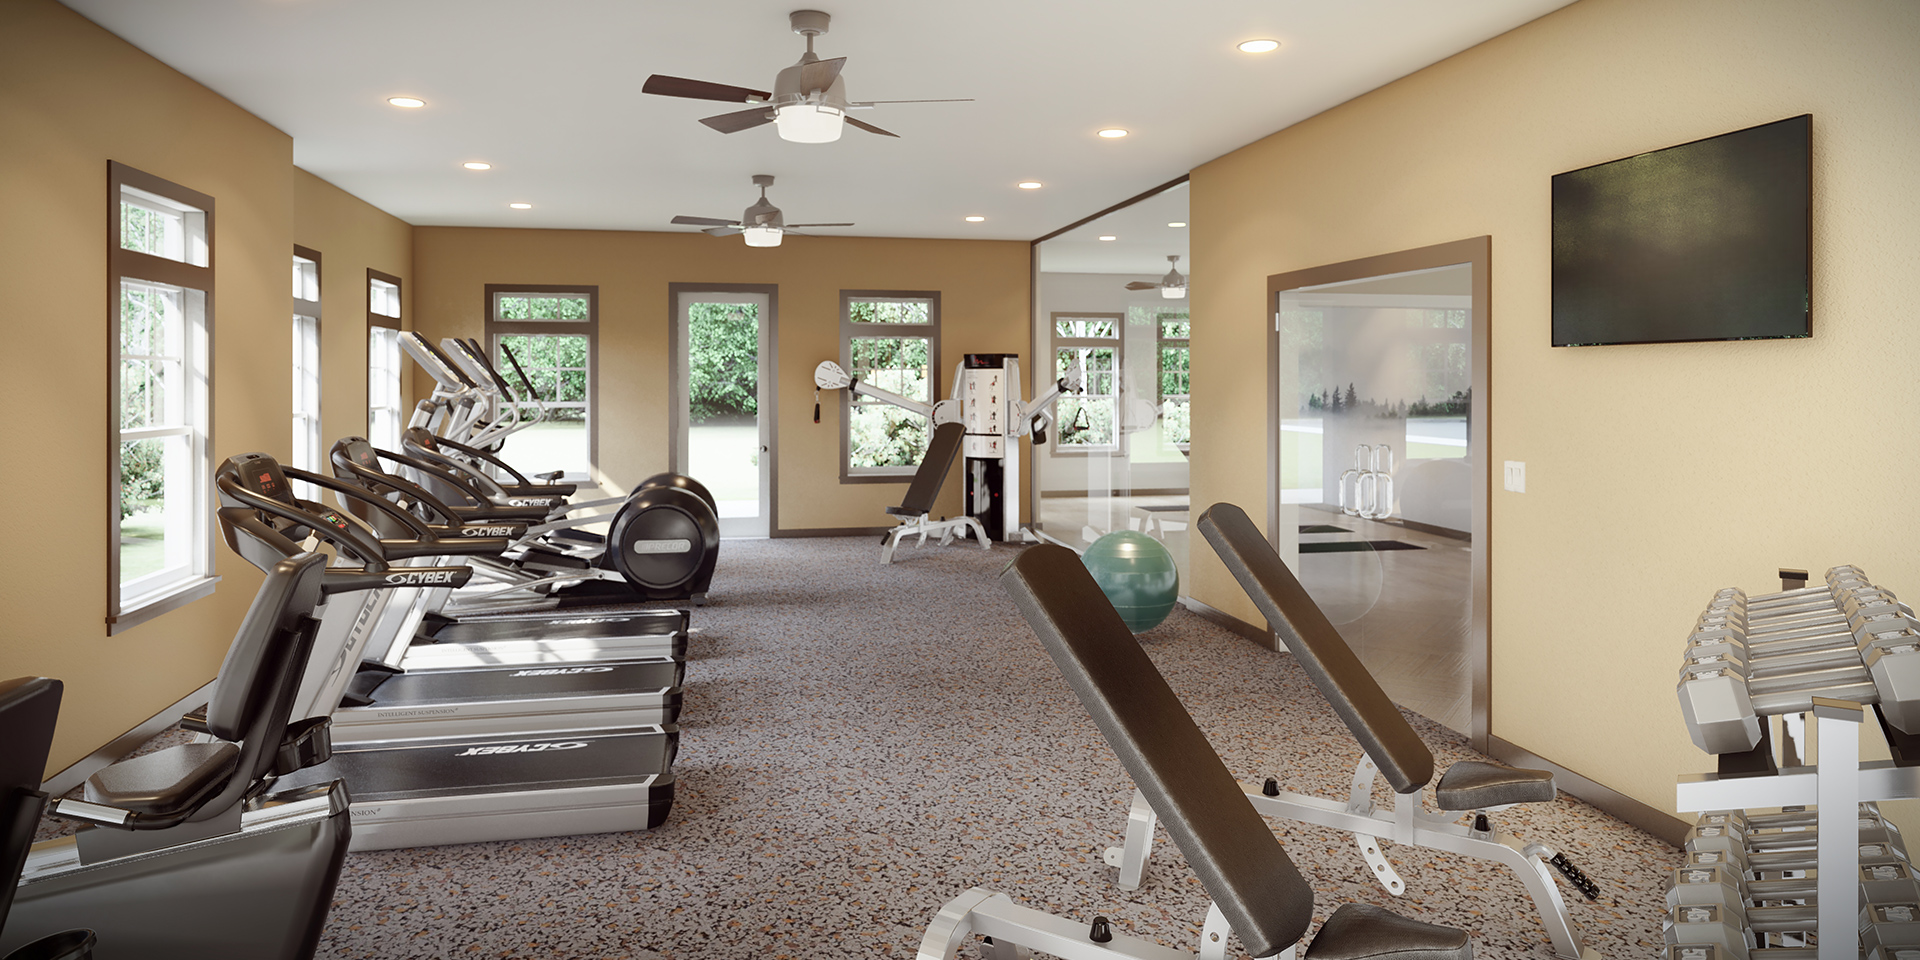 With health in mind The Vistas of Port Jefferson features a state-of-the-art fitness center in addition to multiple walking and biking trails., as well as a full service Yoga studio. 